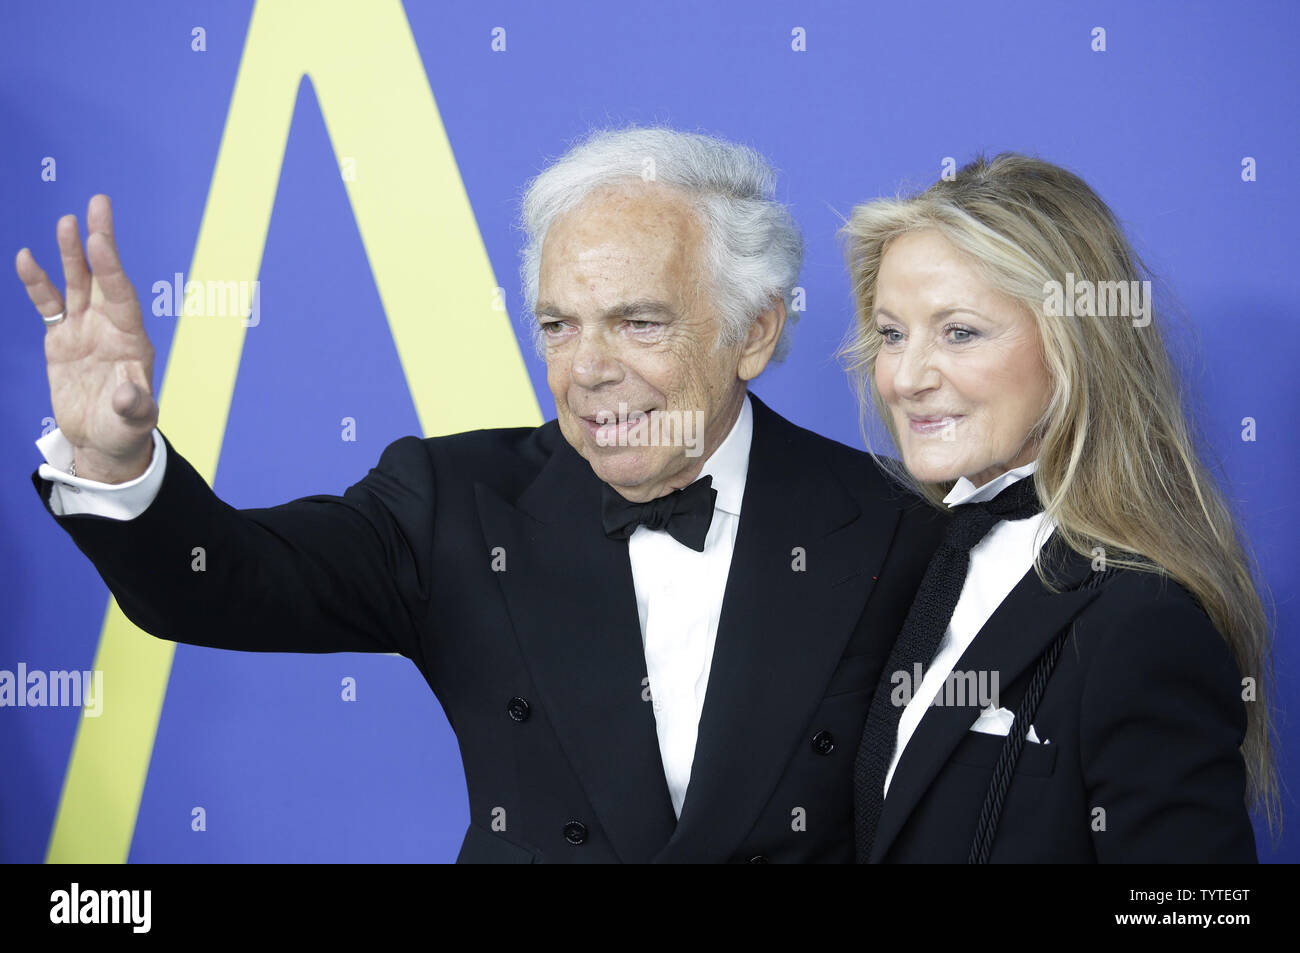 Ralph Lauren and Ricky Anne Loew-Beer arrive on the red carpet at the 2018  CFDA Fashion Awards at Brooklyn Museum on June 4, 2018 in New York City.  Photo by John Angelillo/UPI